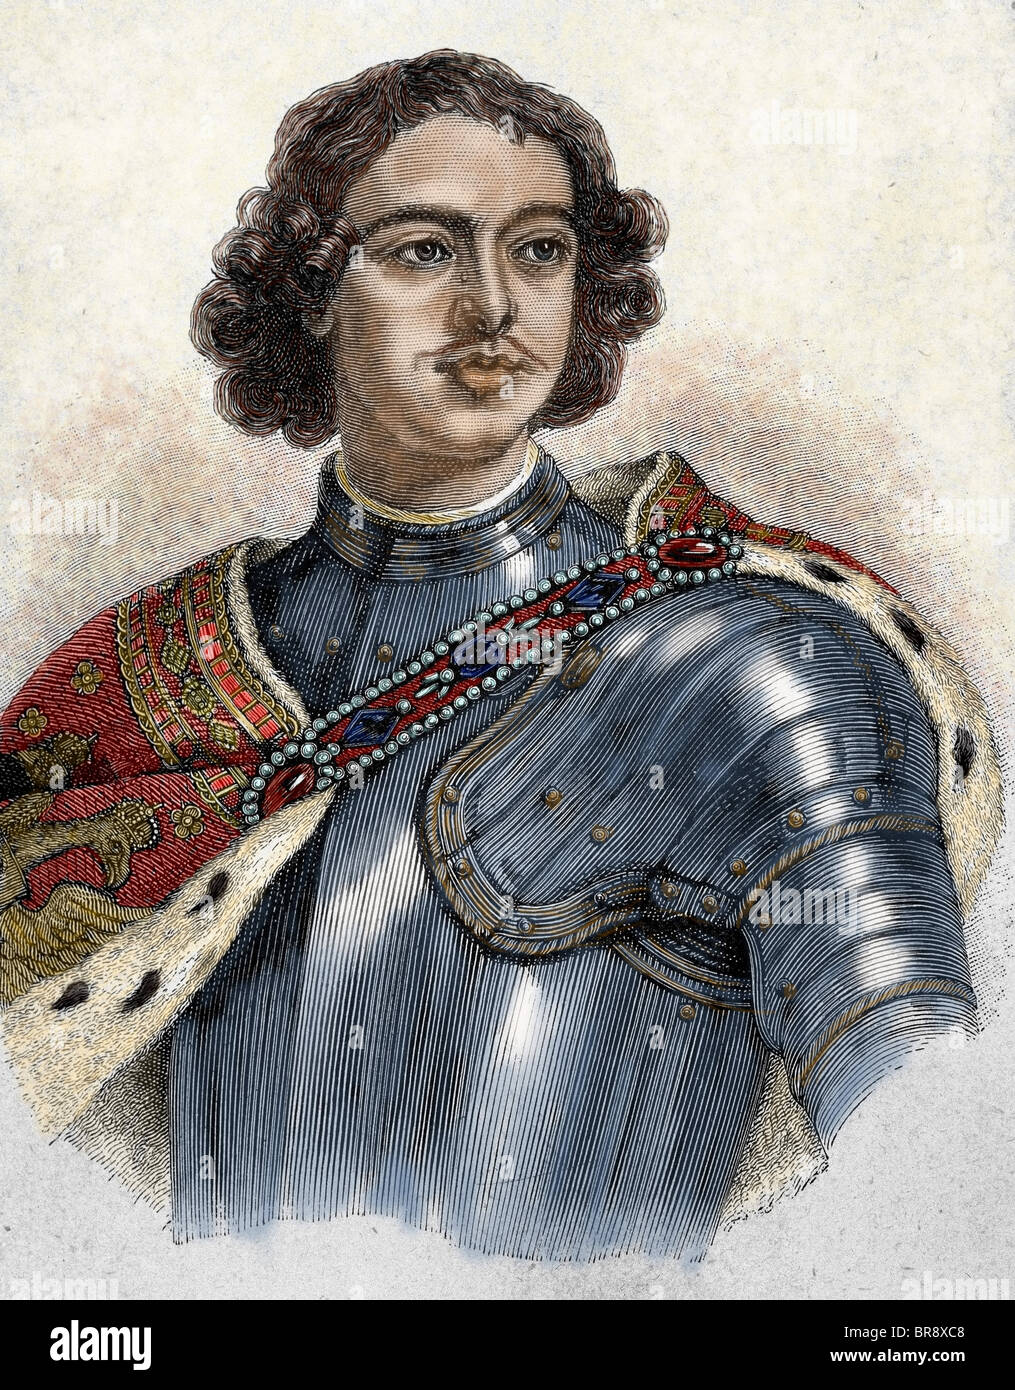 Peter I the Great (1672-1725). Tsar of Russia (1682-1725). Stock Photo